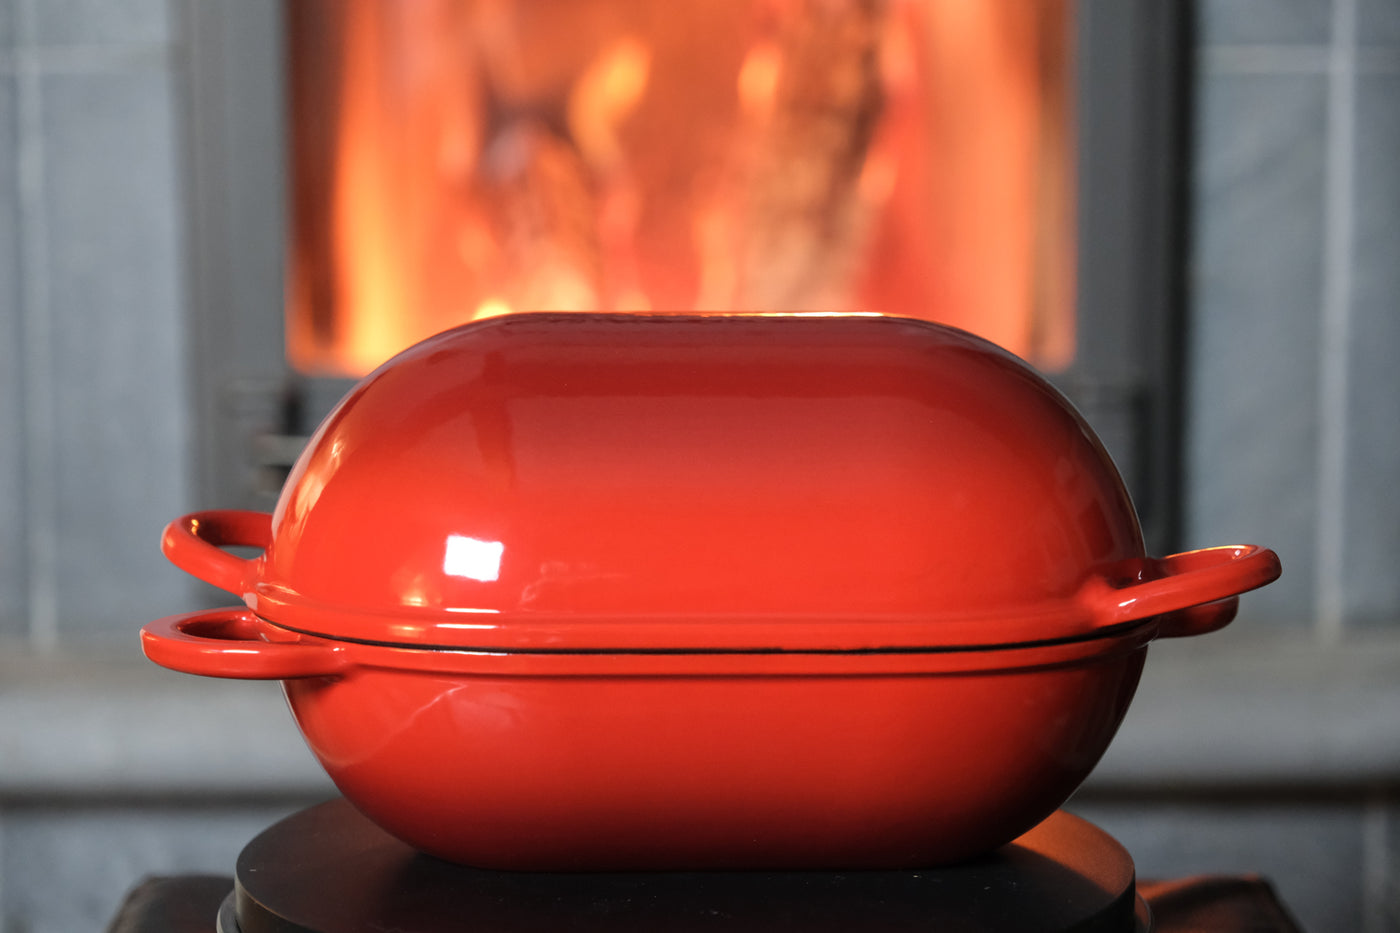 Enameled Cast Iron Bread Pan with Lid, Red, Oven Safe Form for Baking, Artisan Bread Kit - Loaf Pan